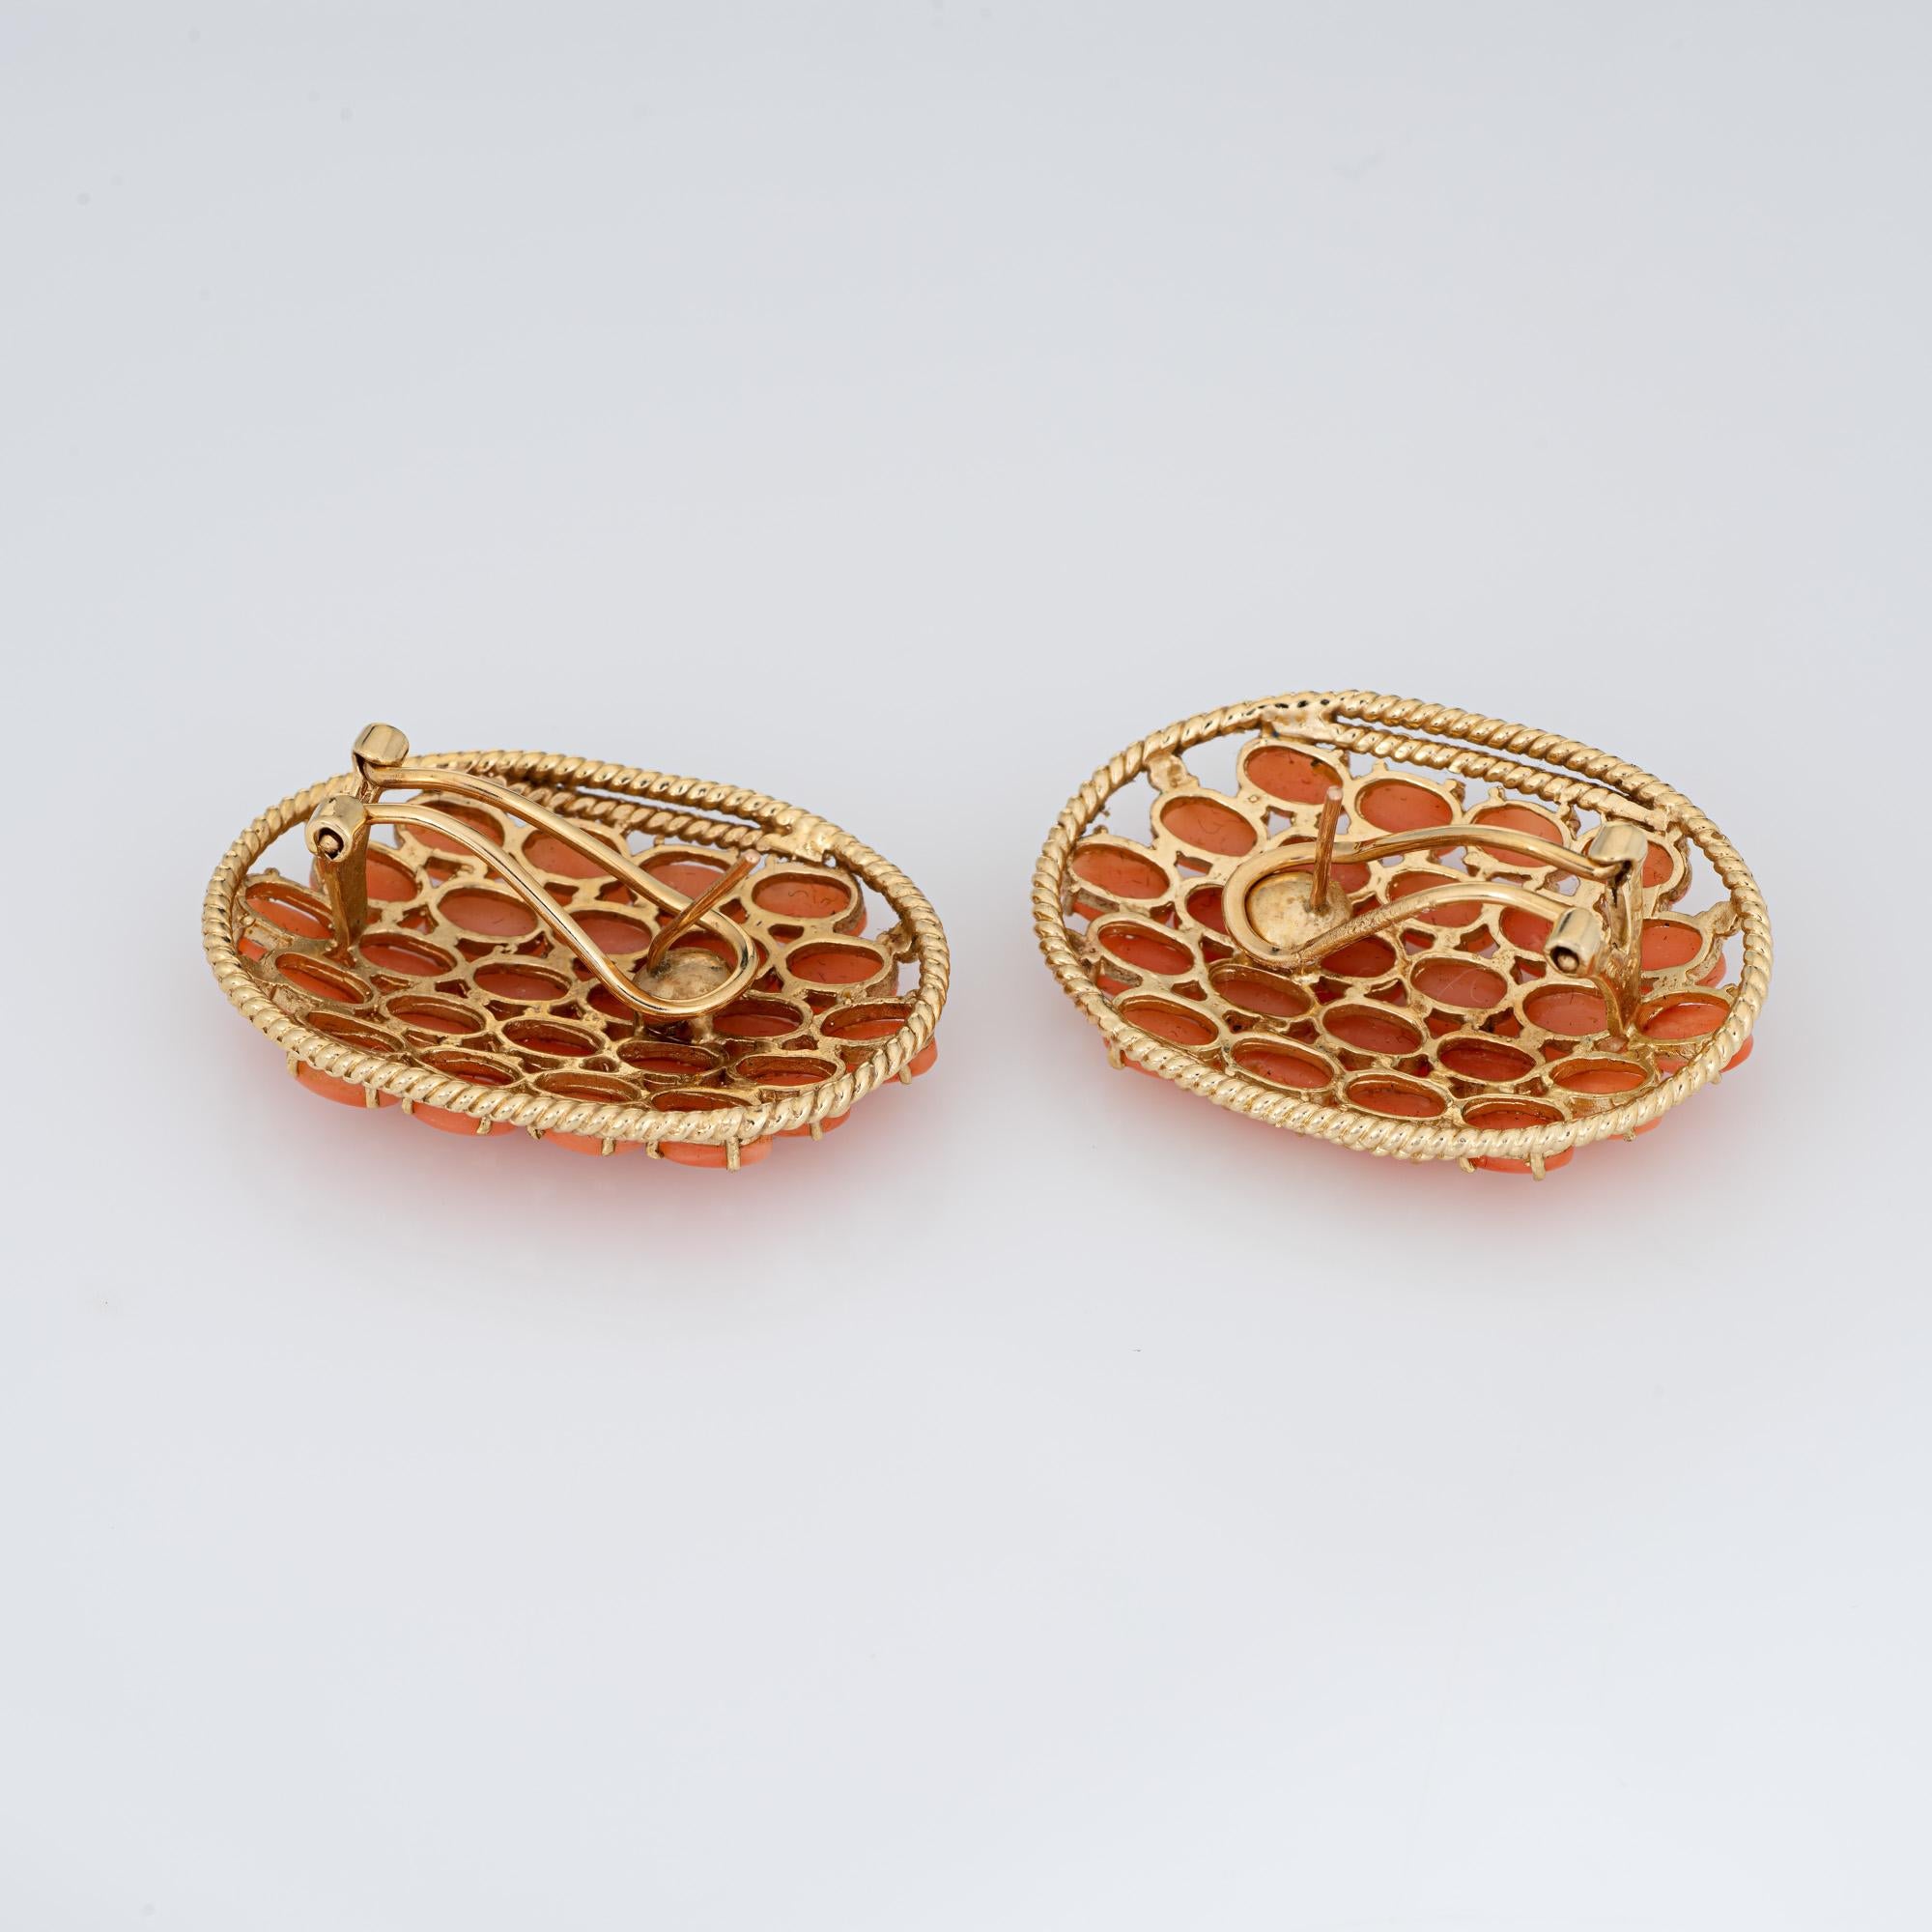 Stylish pair of vintage coral earrings crafted in 14k yellow (circa 1960s). 

Coral is uniform in size measuring 5mm x 3mm (0.20 carats each - 9.60 carats total estimated weight).  

Large in scale measuring 1.25 x 0.90 inches, the earrings make a